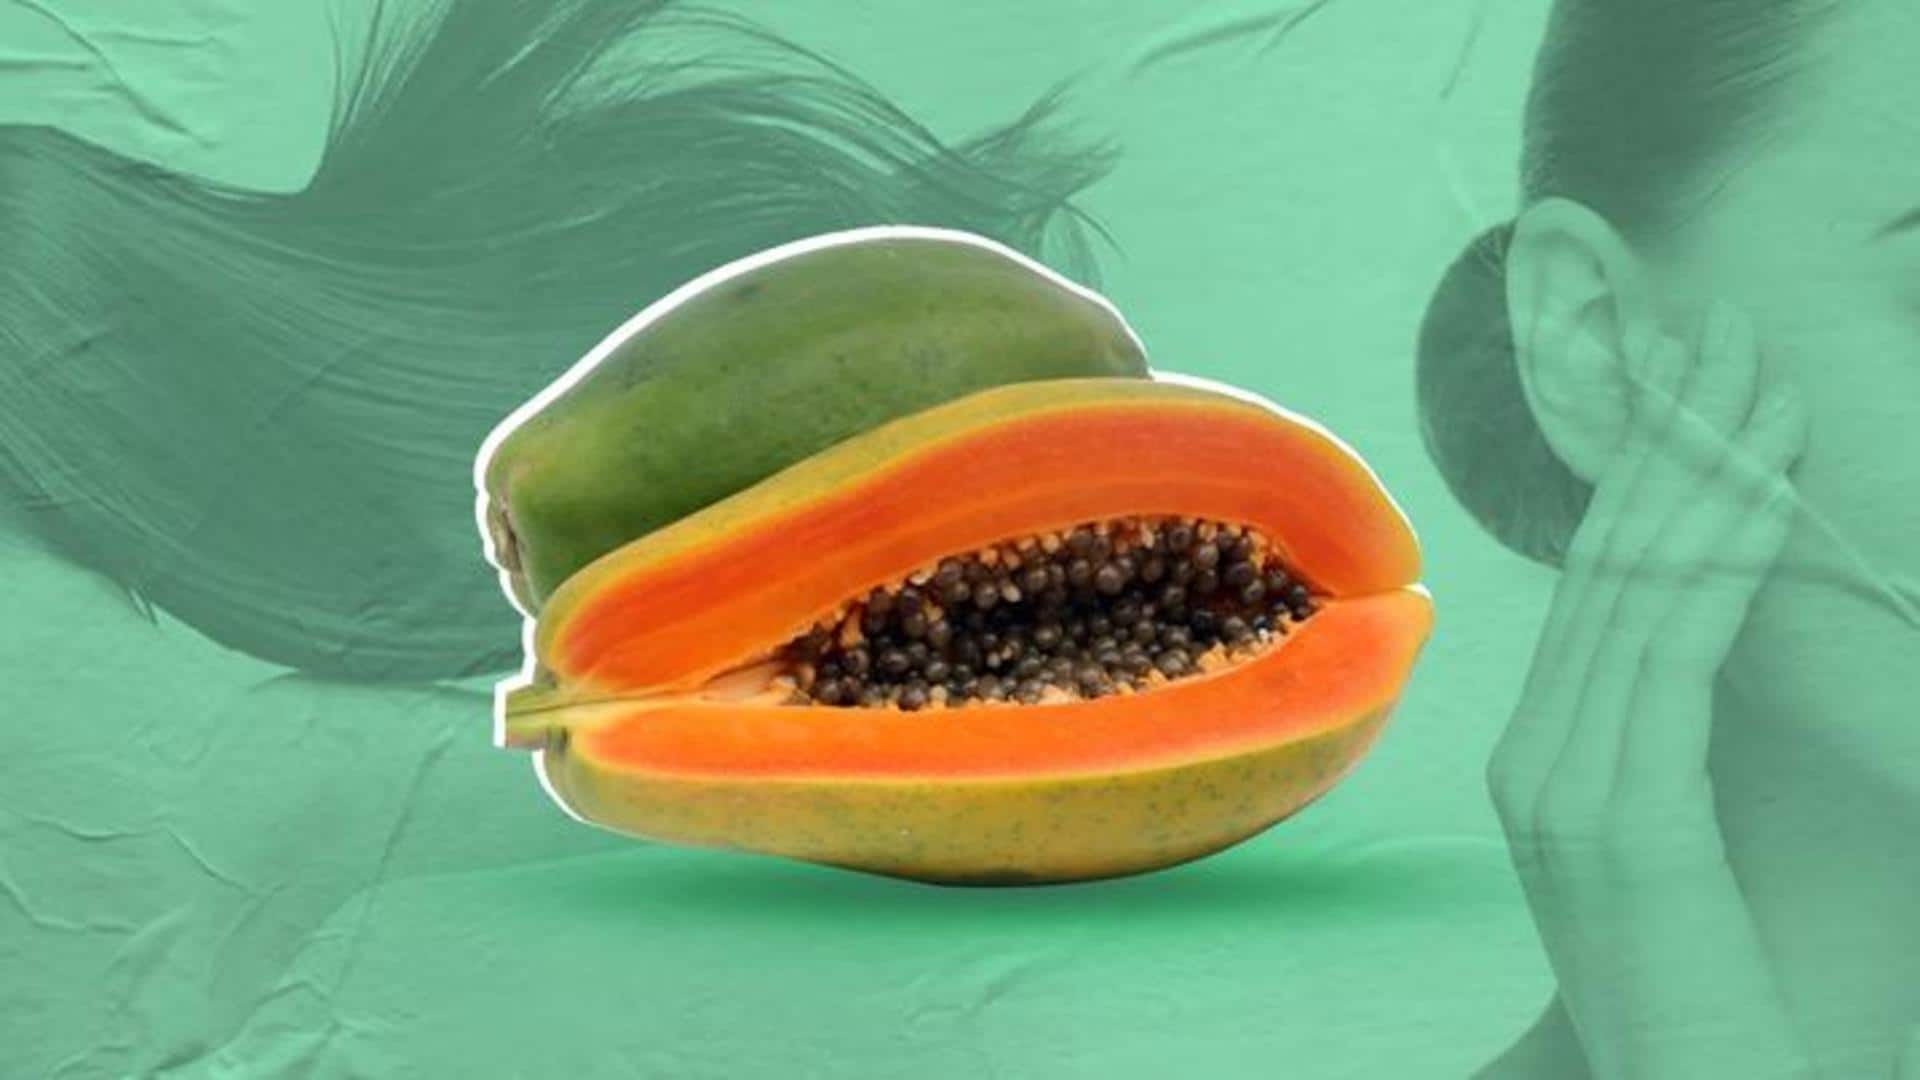 Check out the benefits of papaya for hair and skin